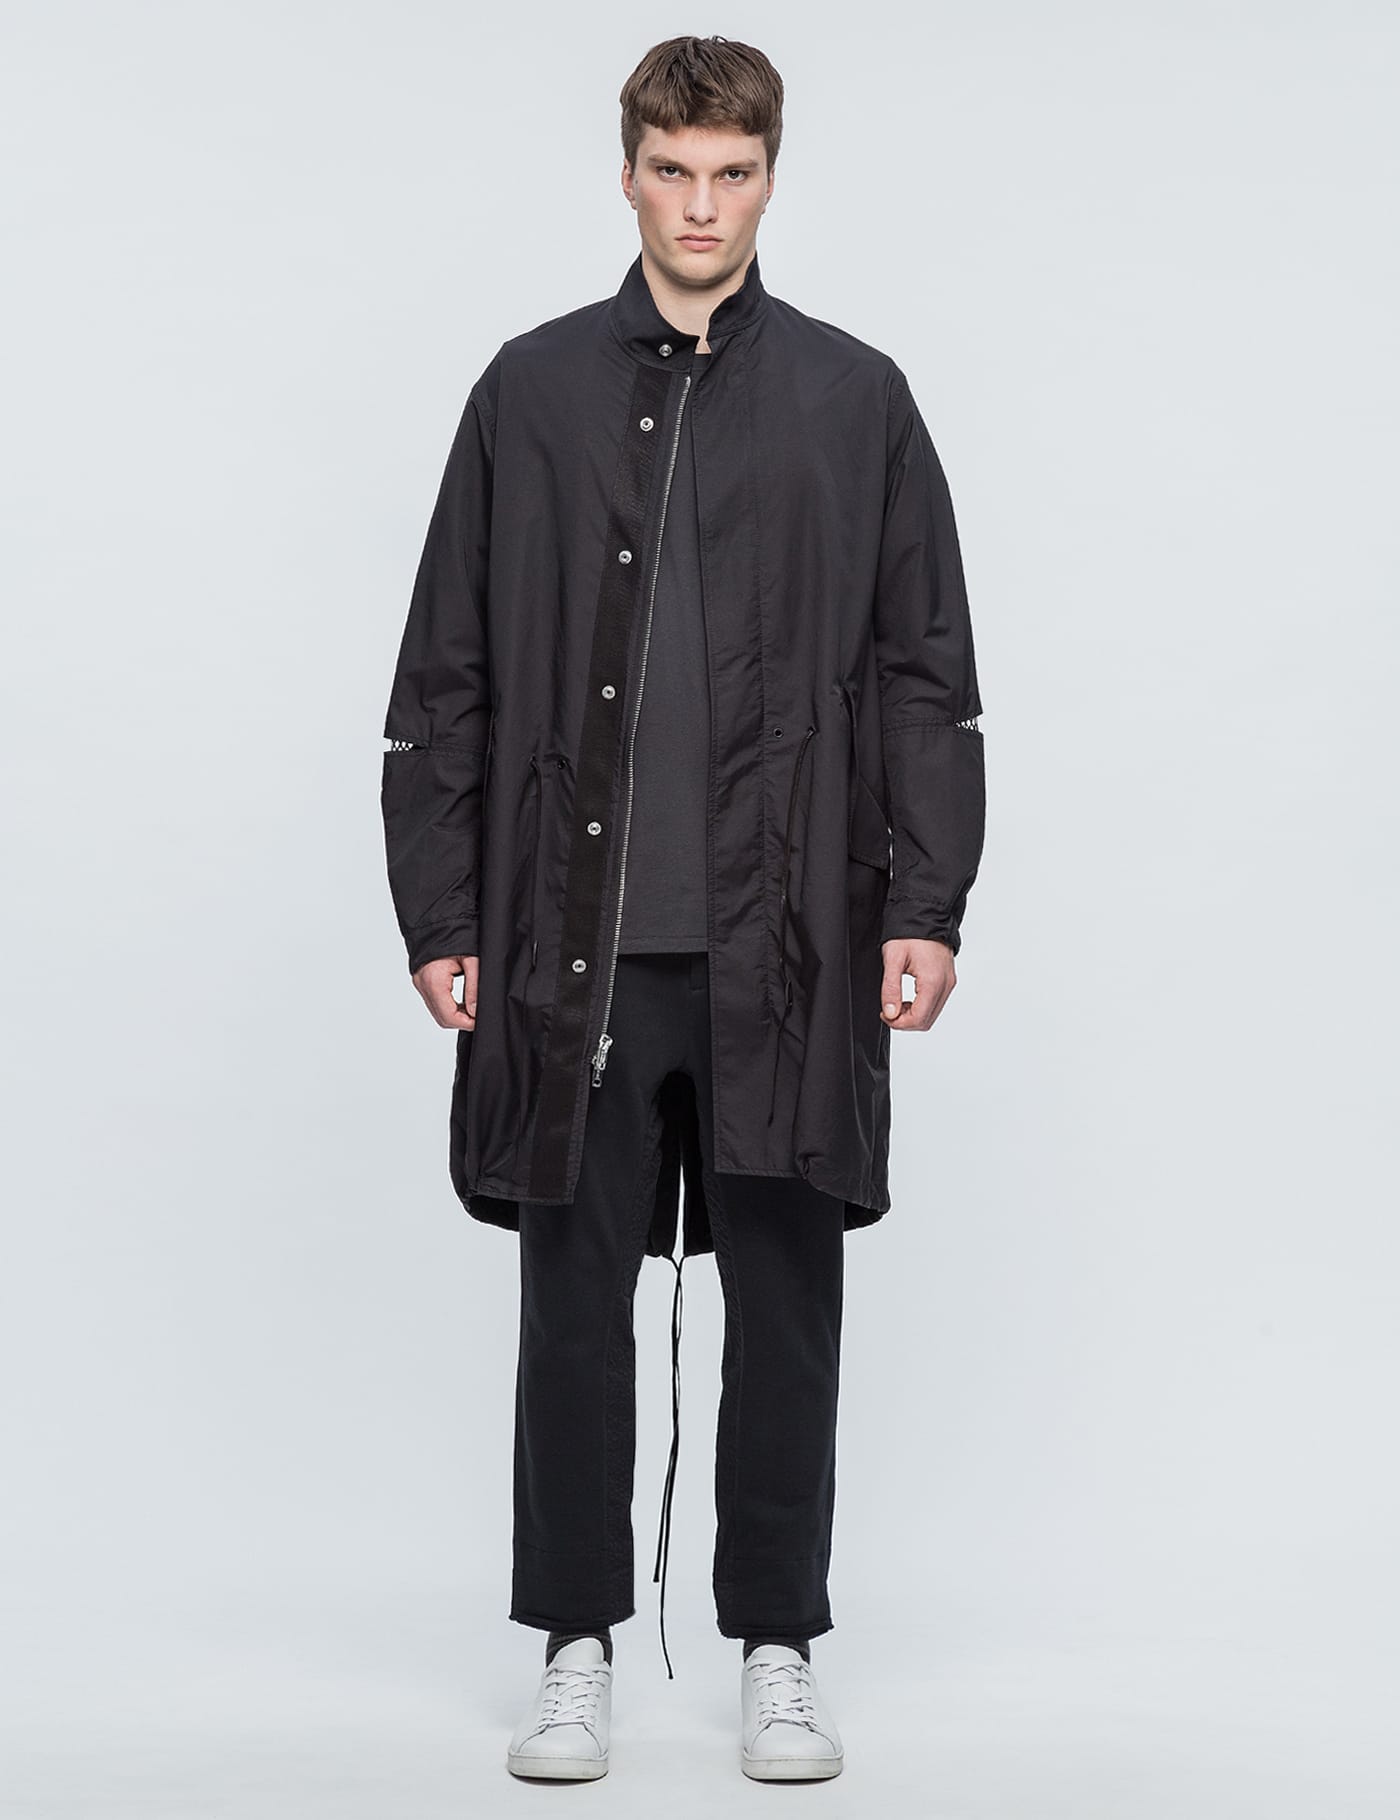 3.1 Phillip Lim - Fish Tail Parka with Mesh Sleeve Lining | HBX